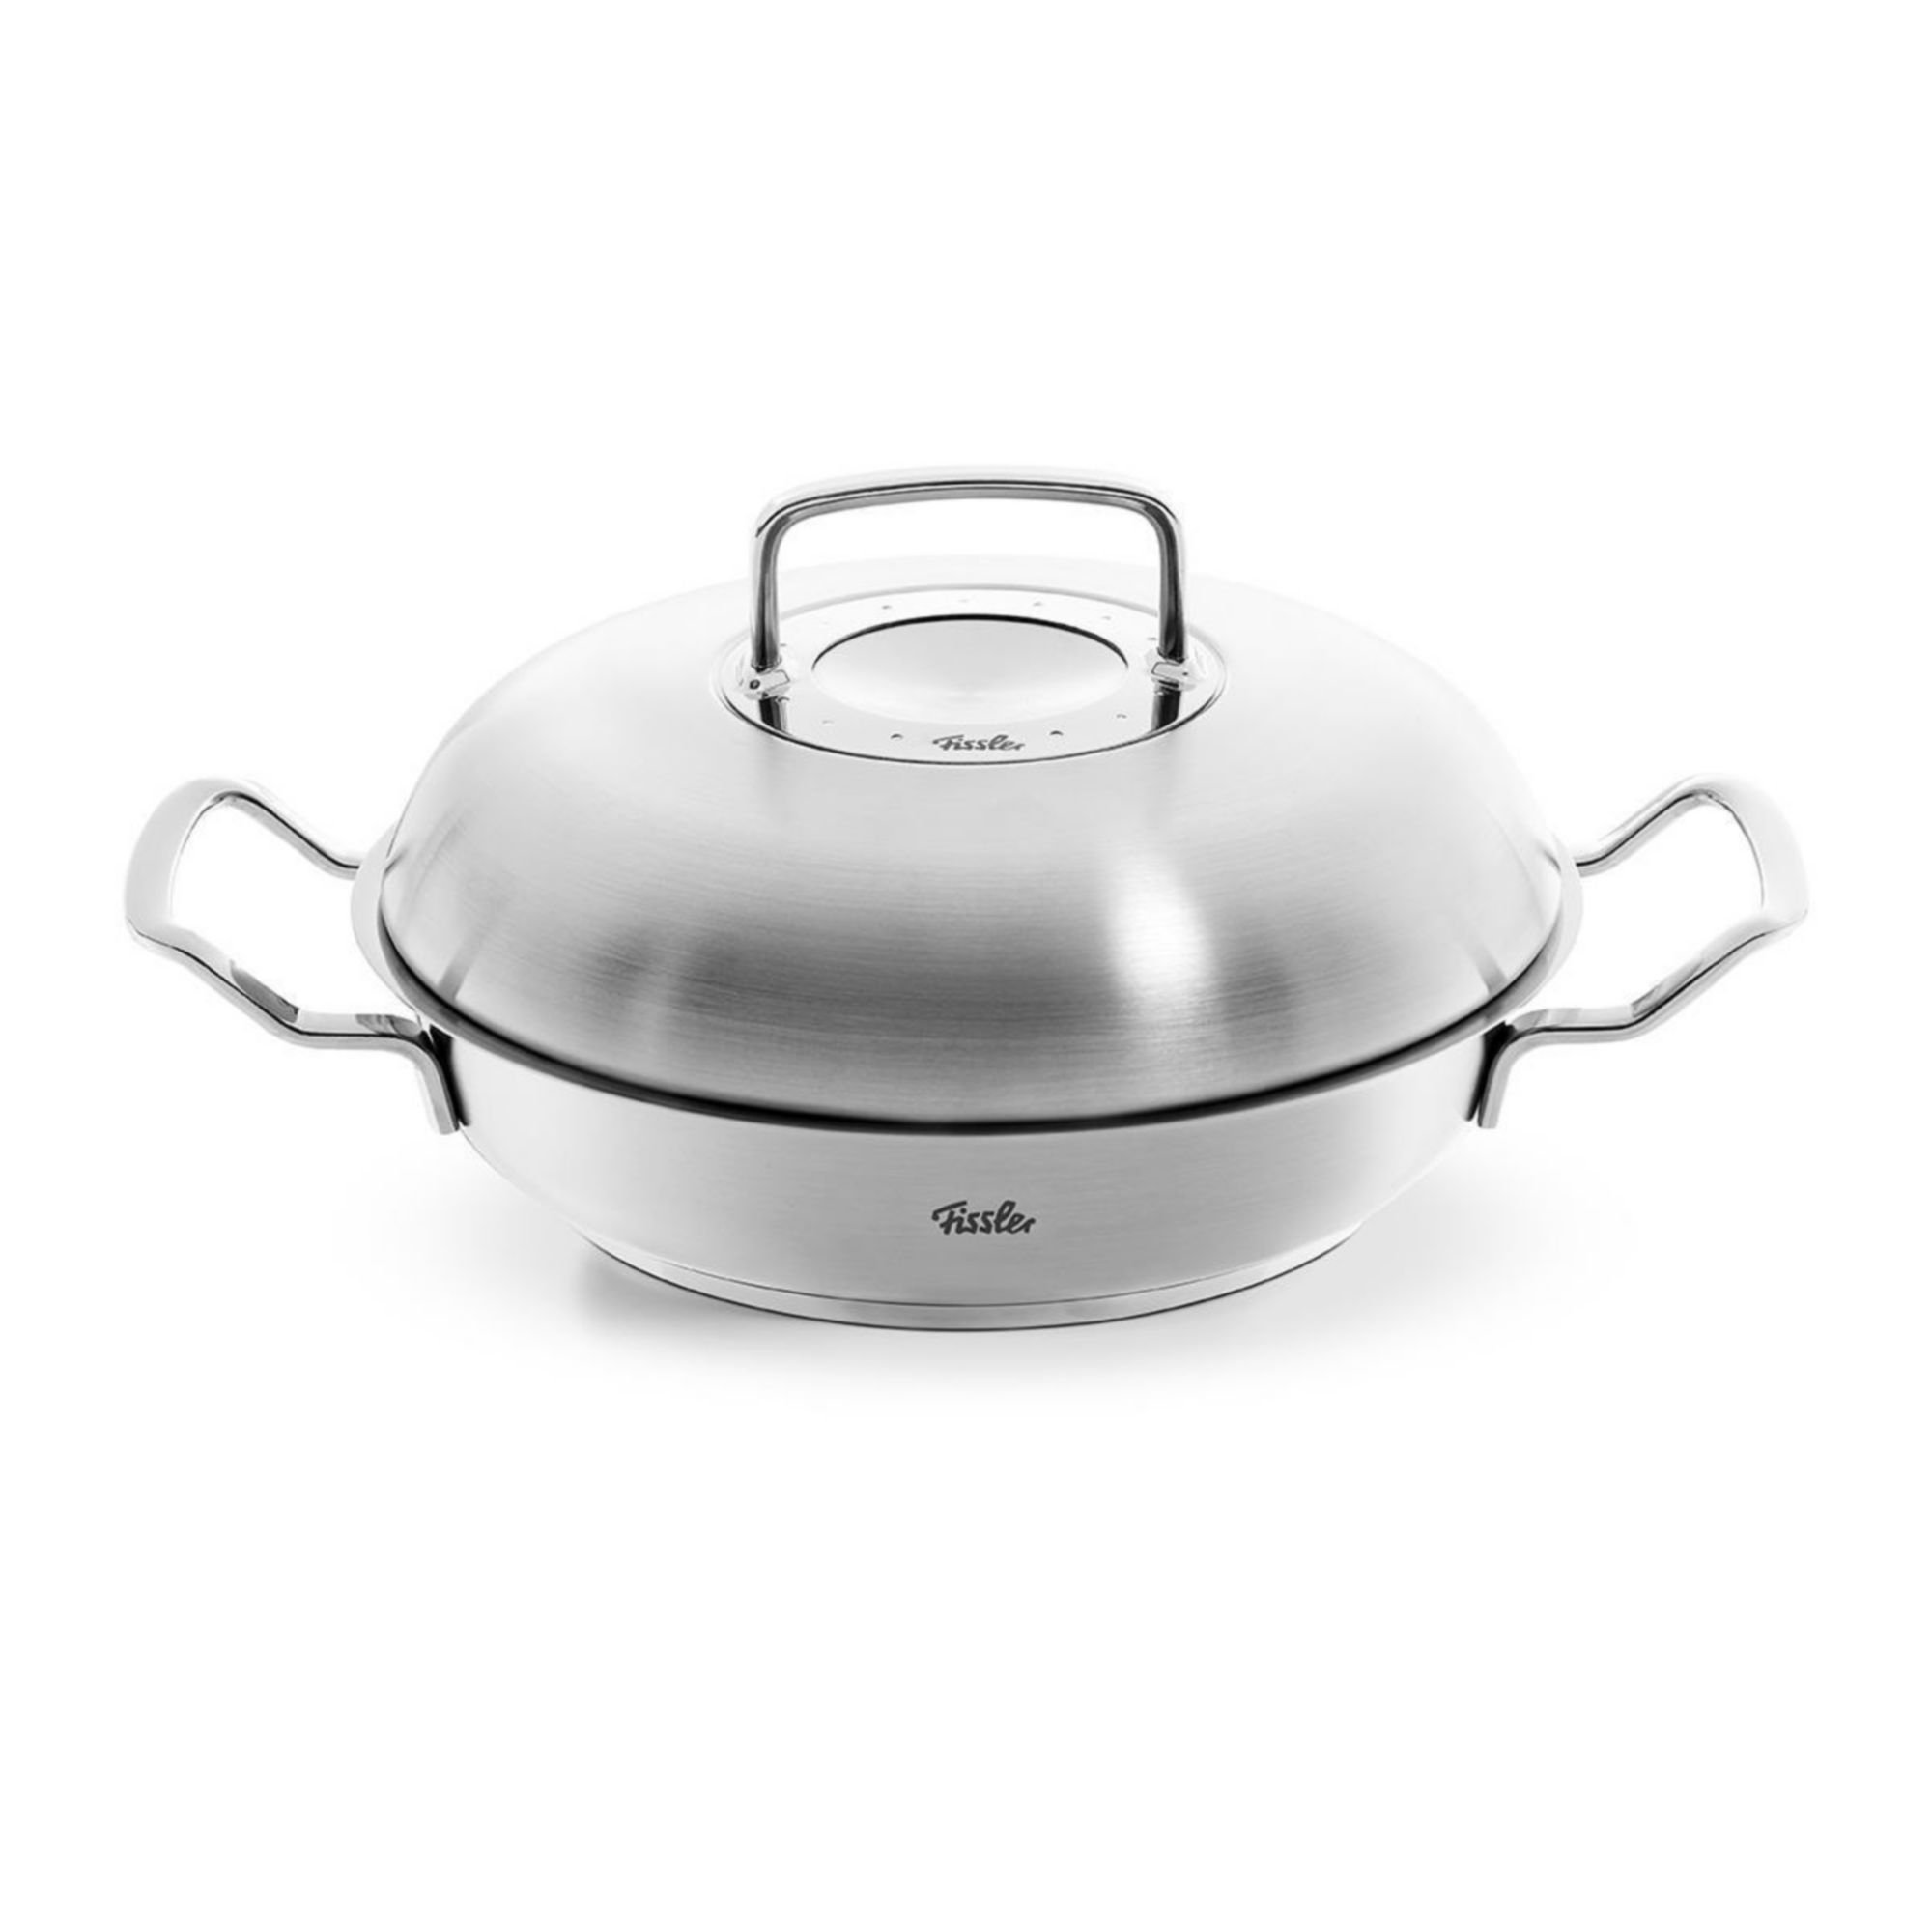 9.5-Inch Stainless High Fissler Pan Original-Profi Wayfair & Collection® Reviews Lid, Dome Serving With Steel |